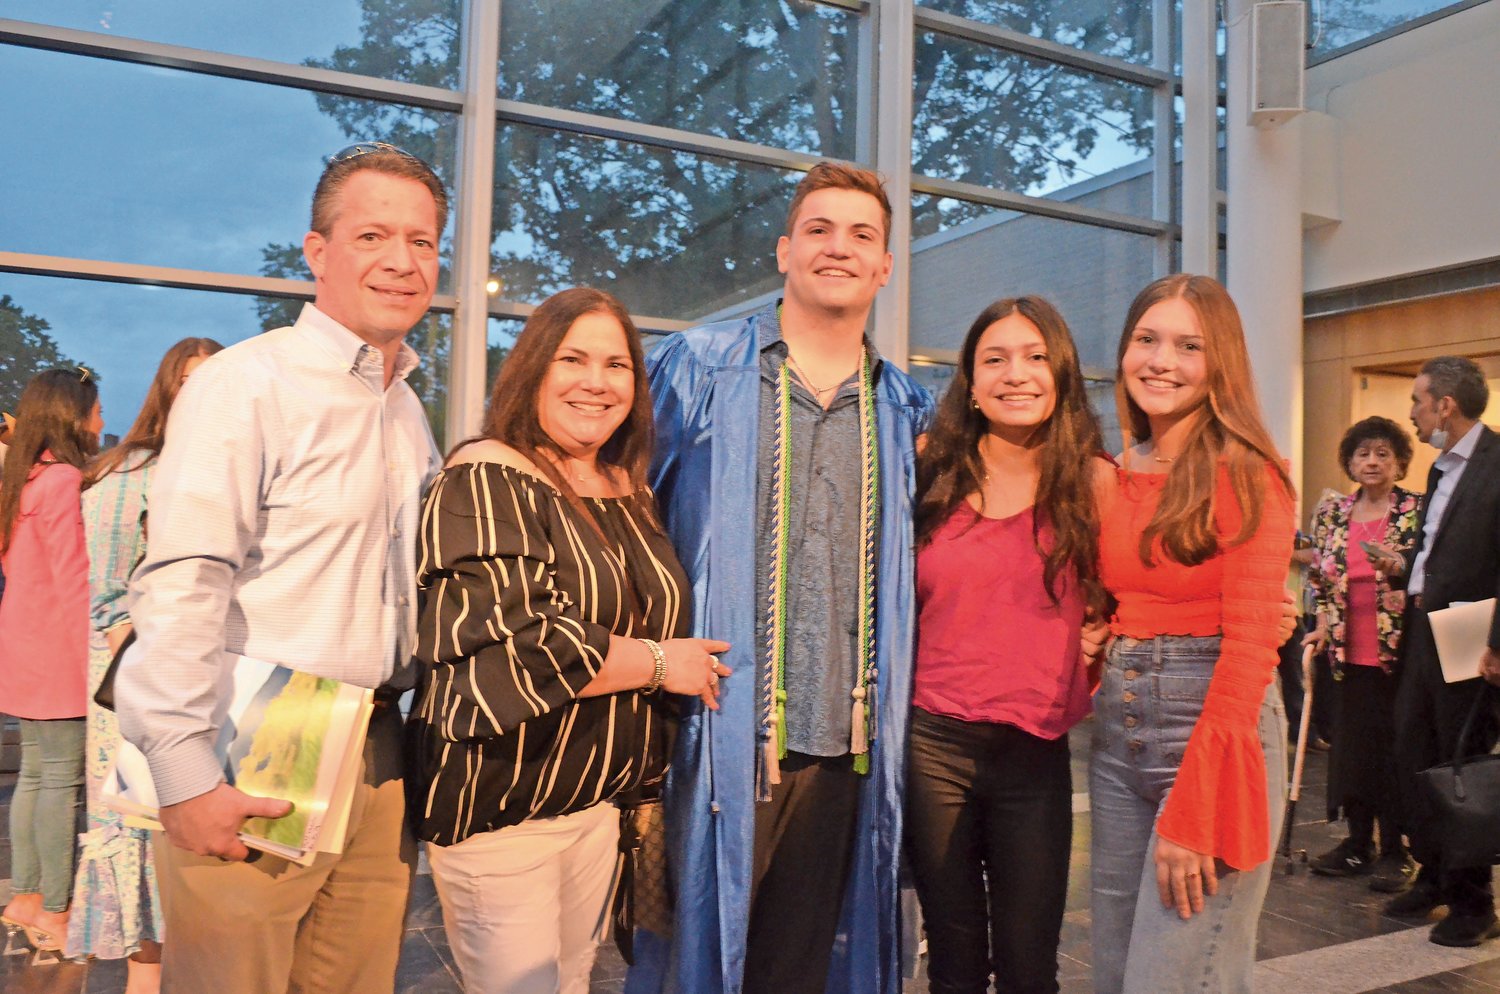 The Morgan family after Nicholas’s graduation  from Hewlett High School family.